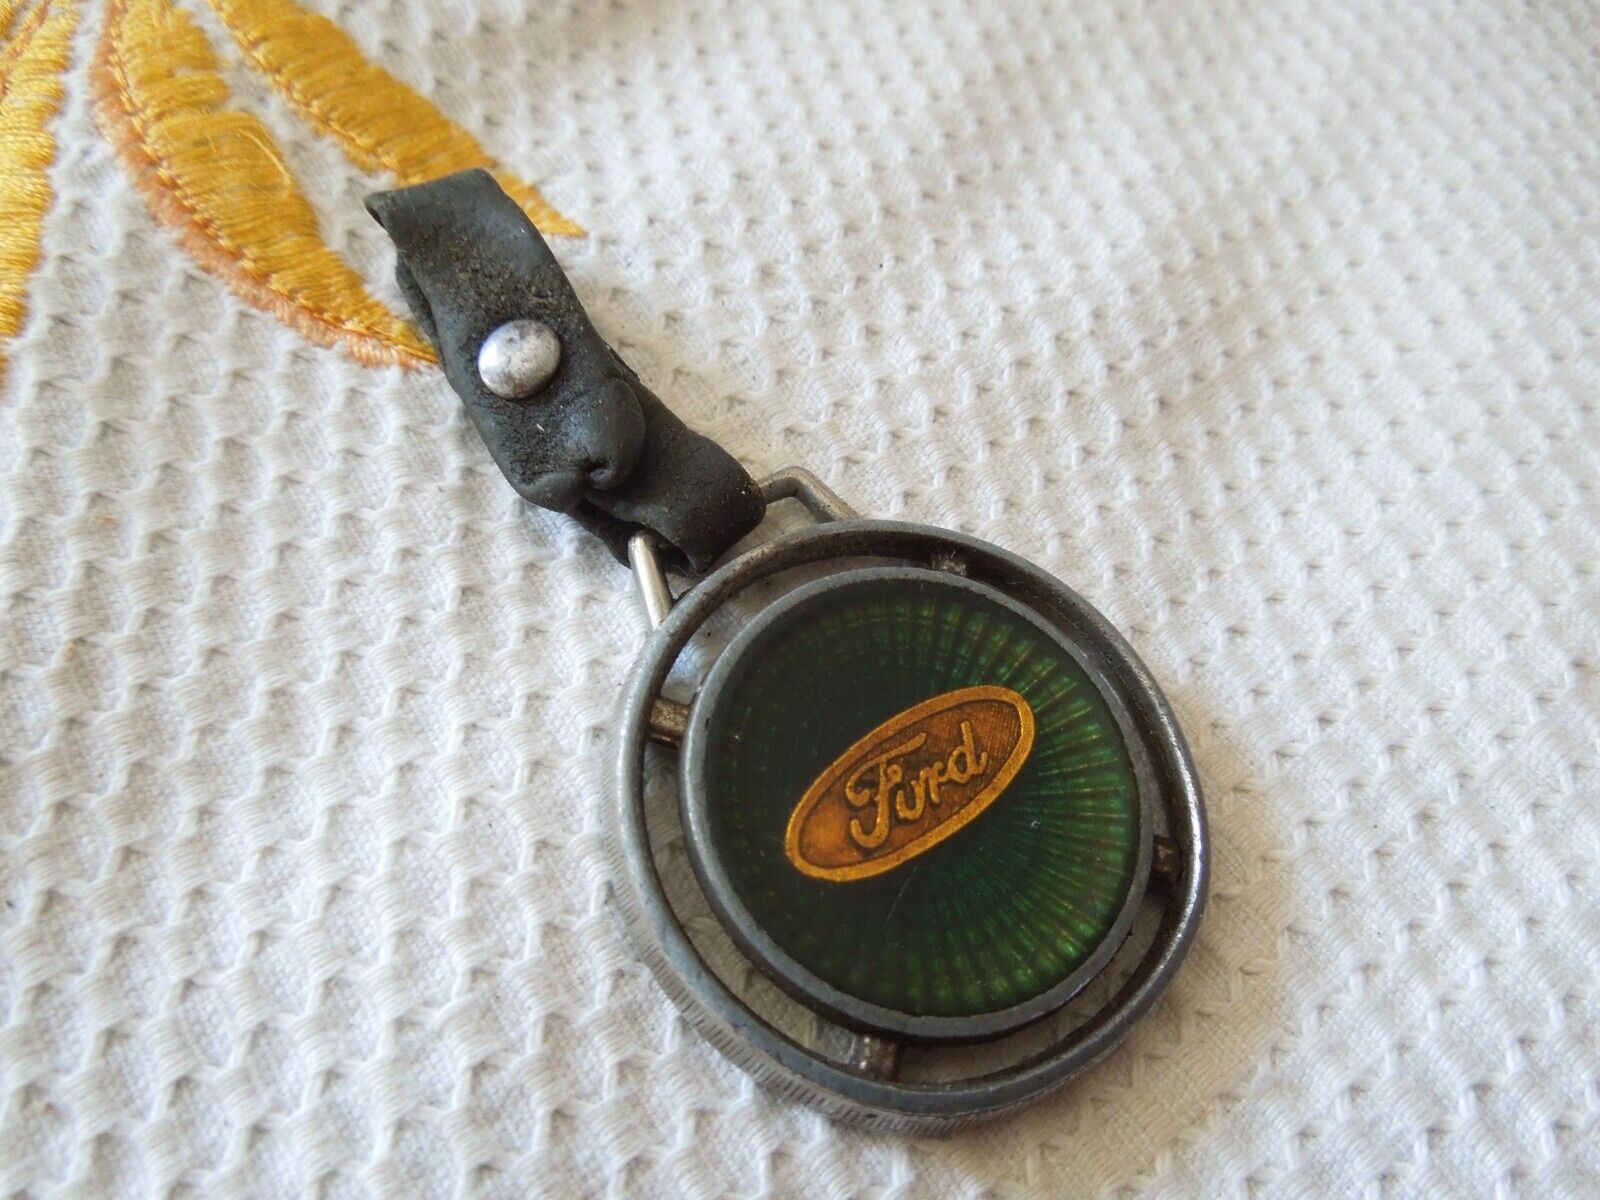 Vintage FORD 1960\'S ORIGINAL CROWN STAMPED LEATHER KEY FOB KEY CHAIN RARE FIND